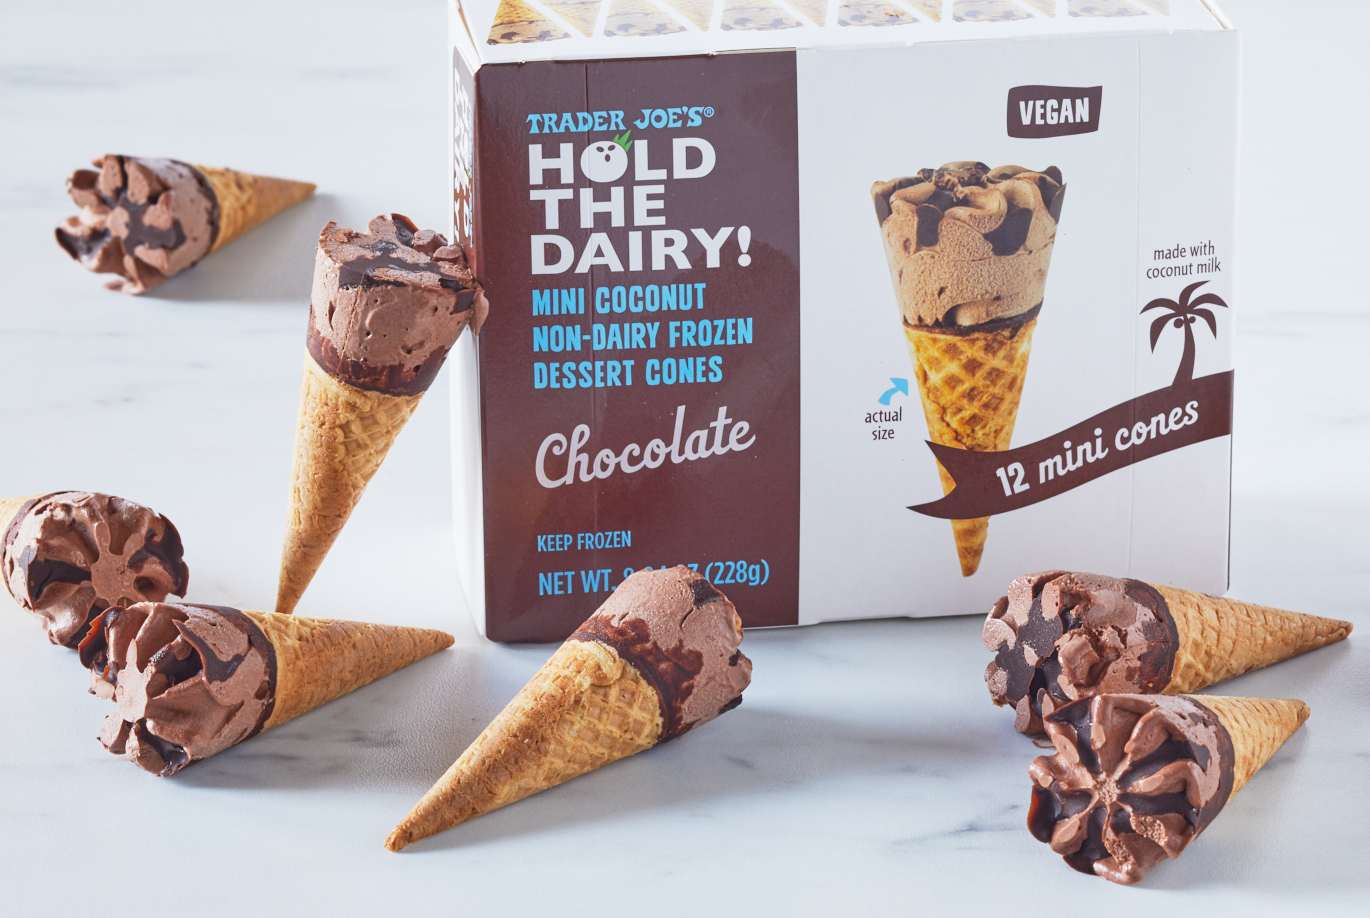 https://www.traderjoes.com/content/dam/trjo/context-images/71119-Hold-Dairy-cones-pdp.jpg